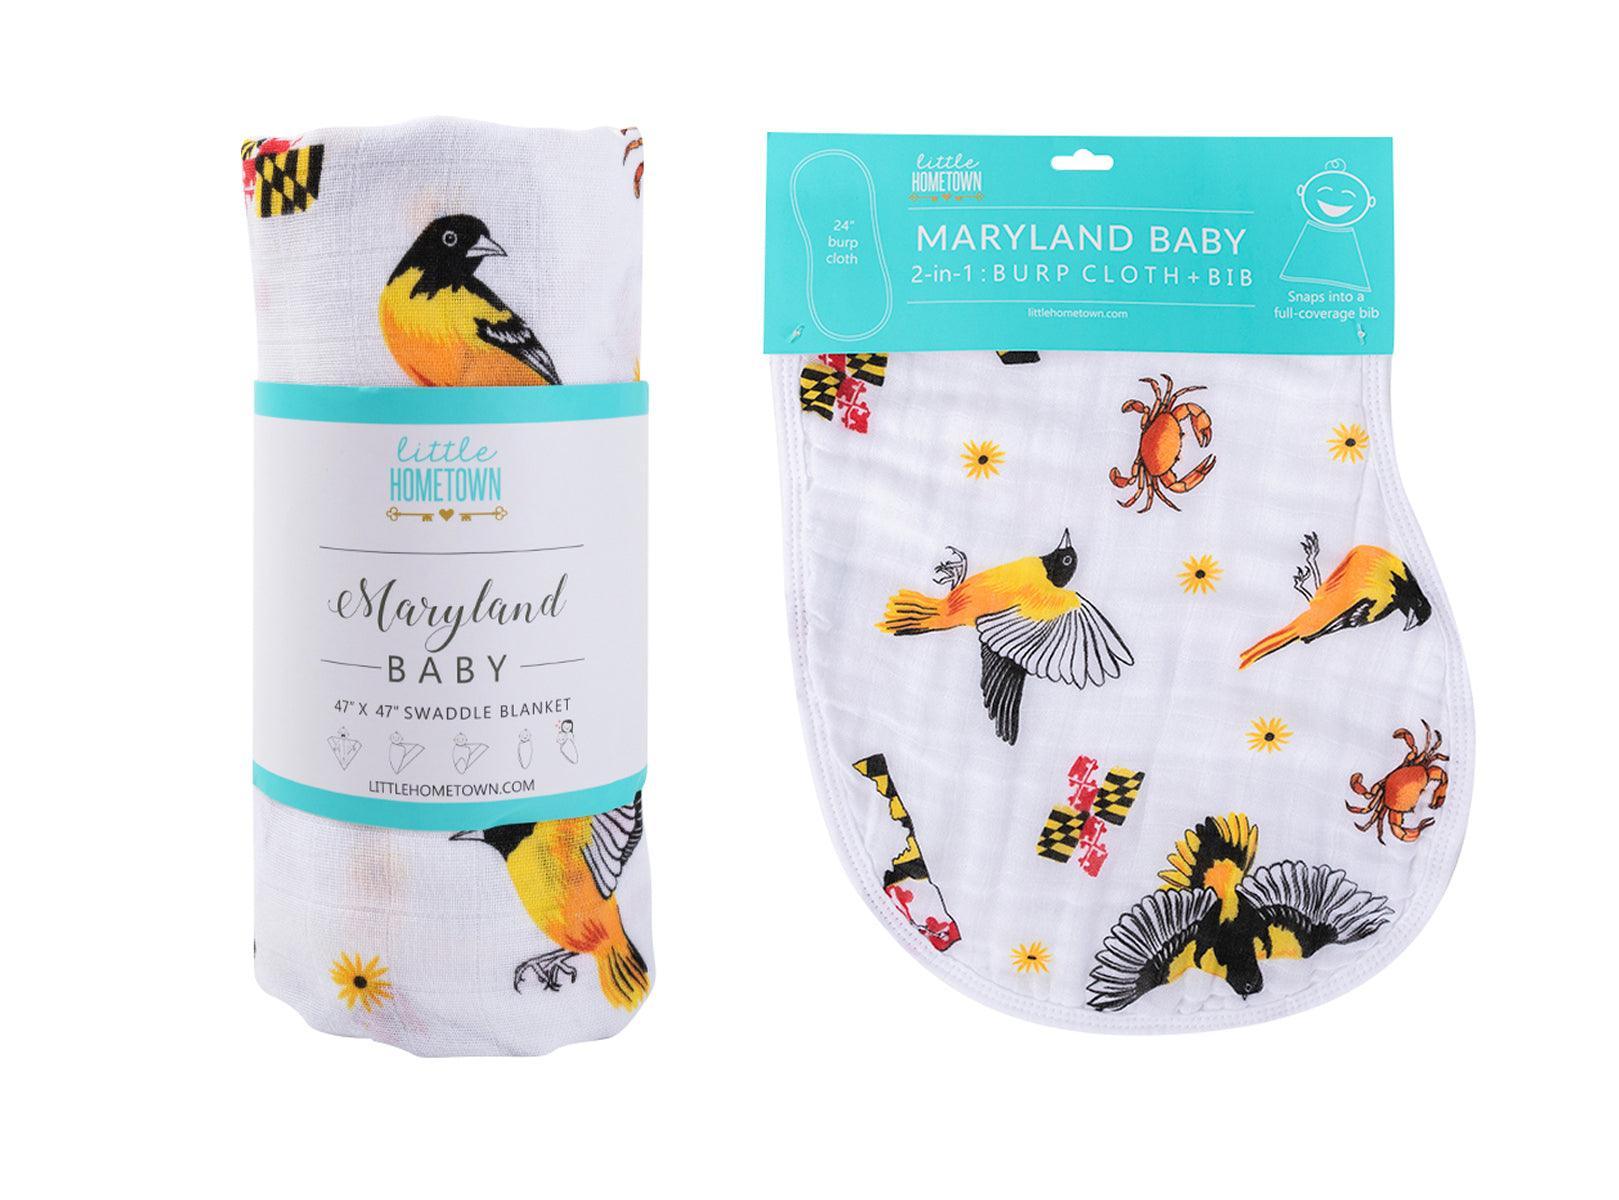 Maryland-themed baby gift set with muslin swaddle blanket and burp cloth/bib combo, featuring state icons.